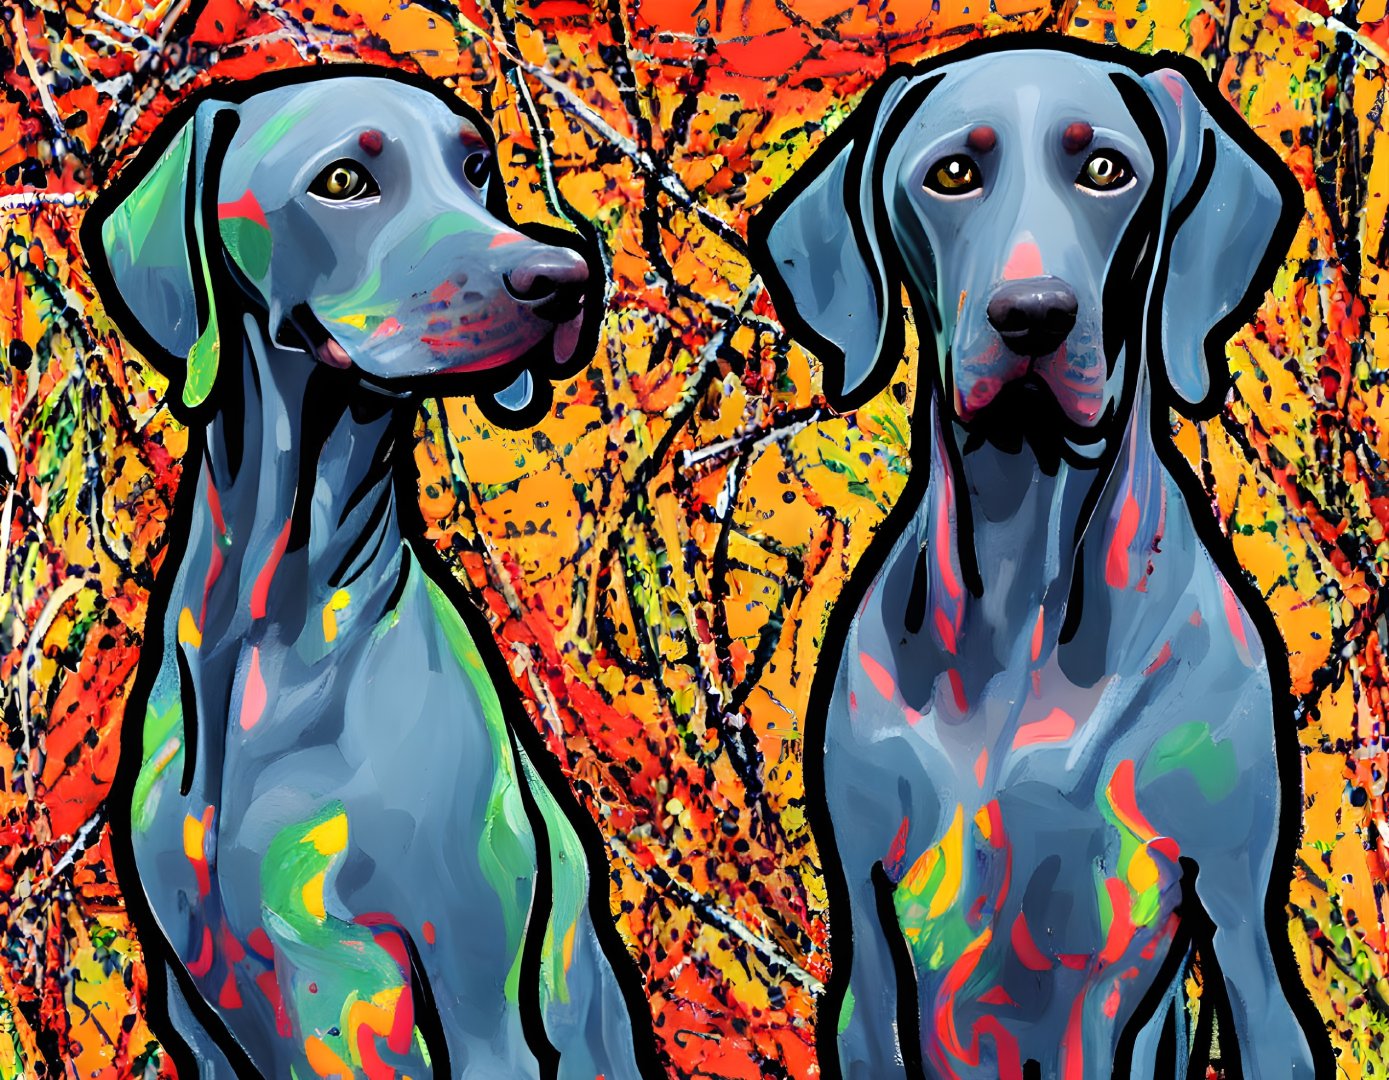 Abstract Art: Colorful Weimaraner Dogs in Dynamic Paint Splatter Scene